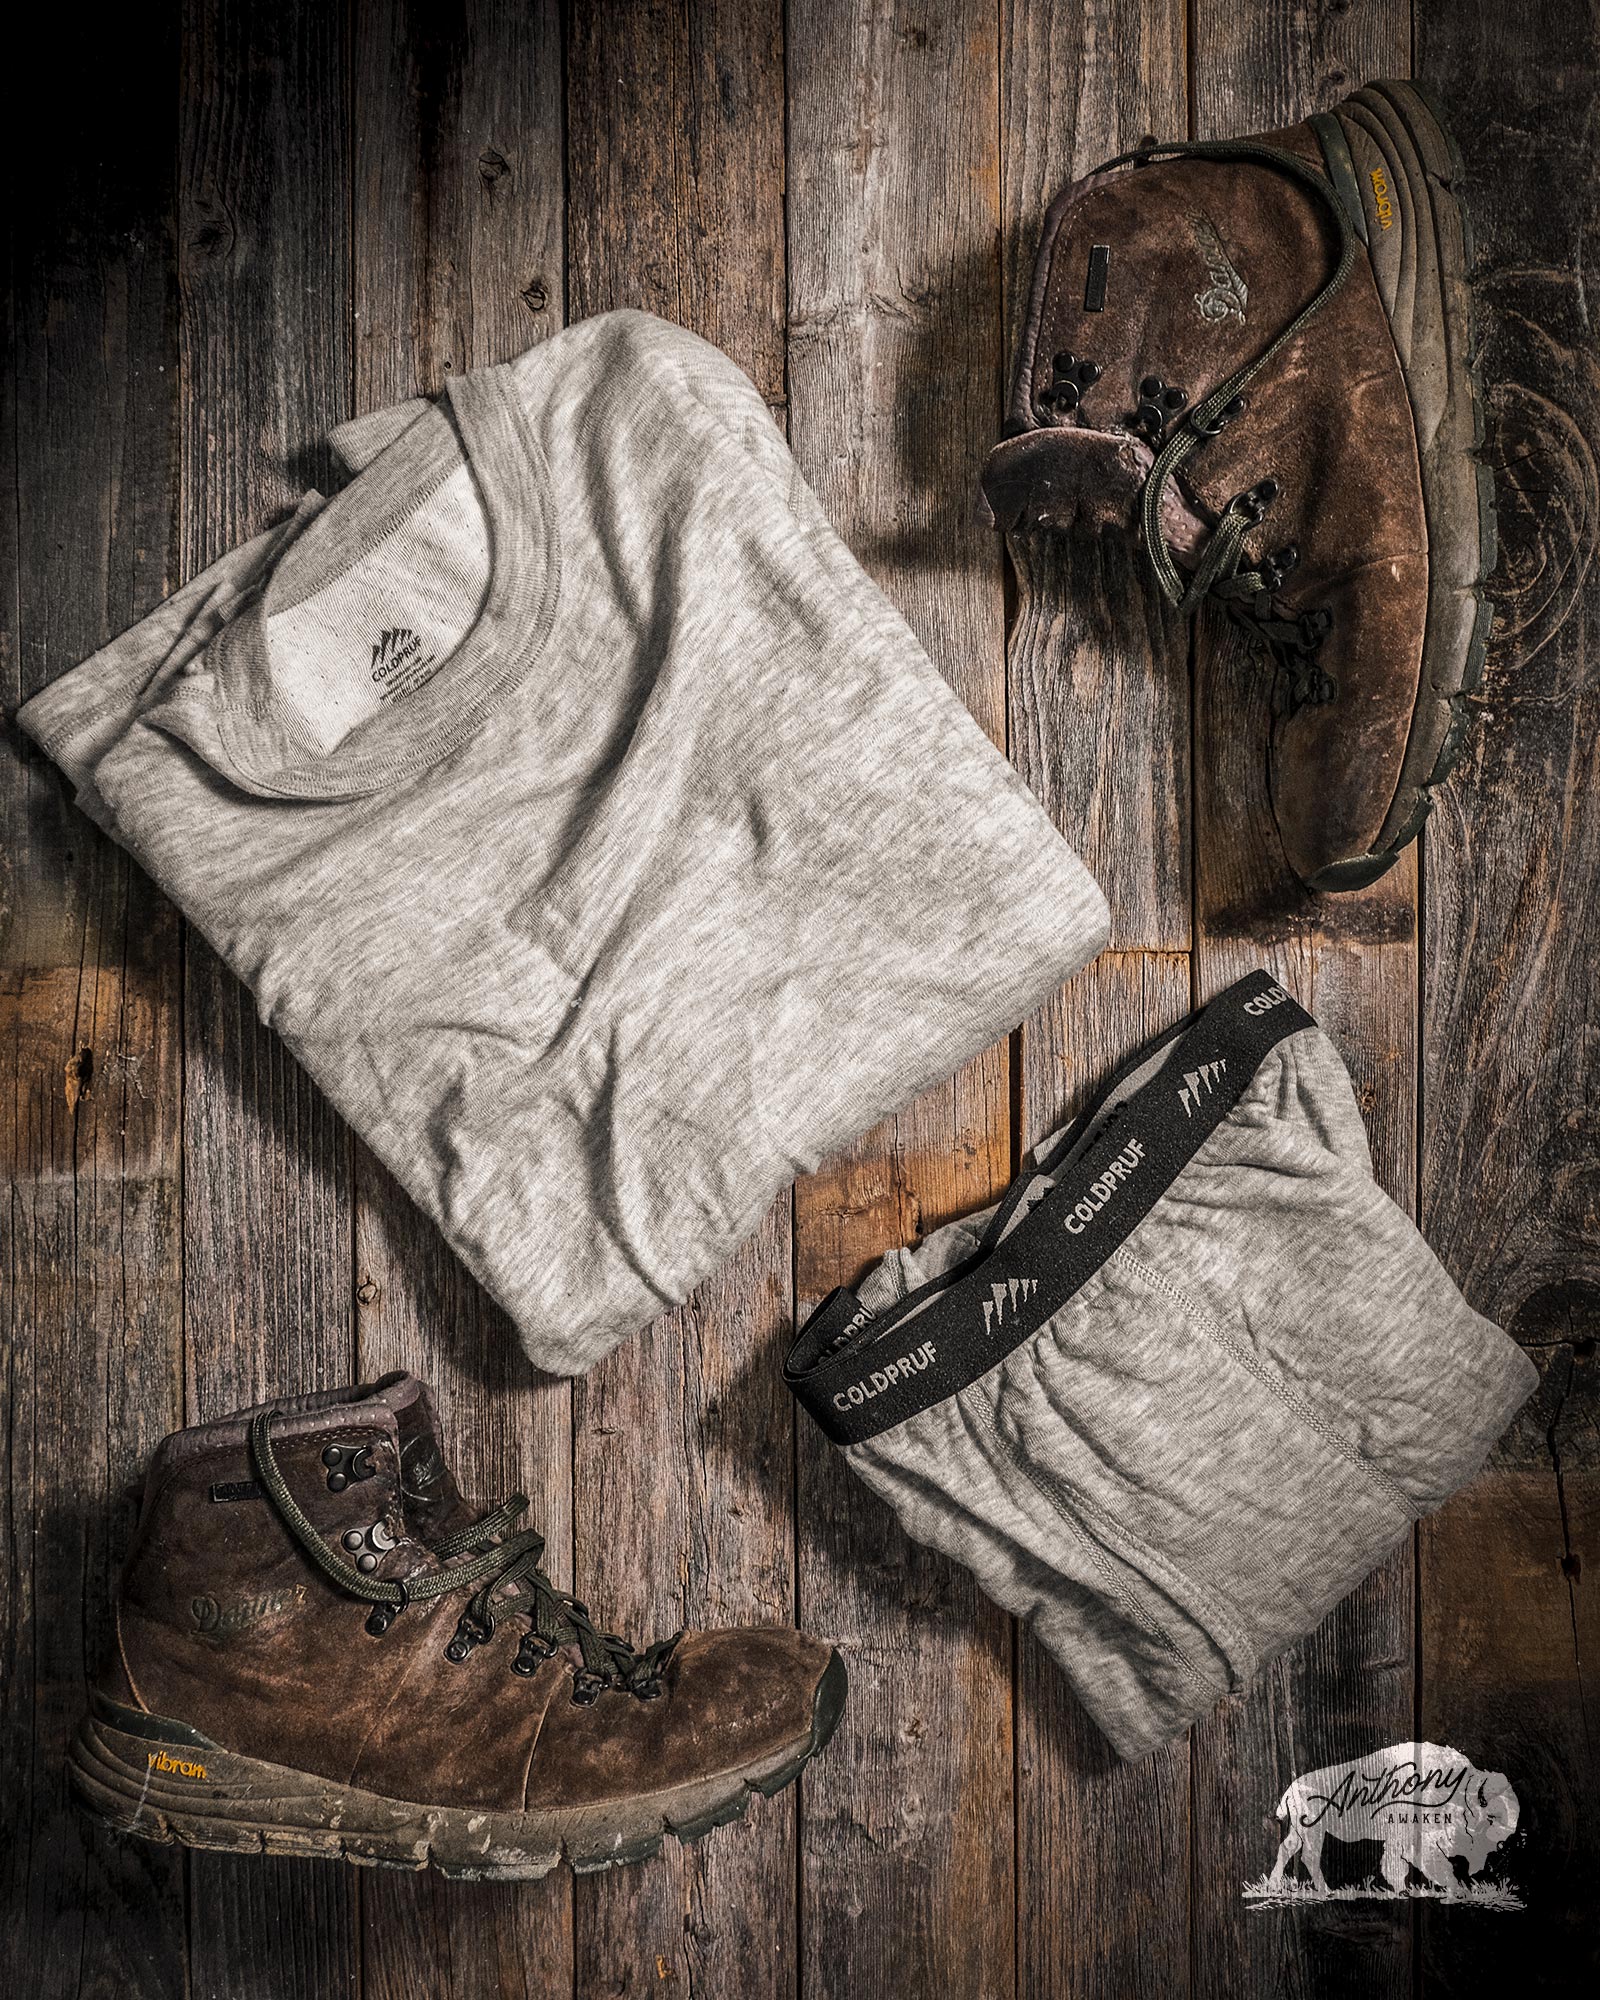 Best Winter Bushcraft Clothing • My favorite anorak, pants, boots & more!